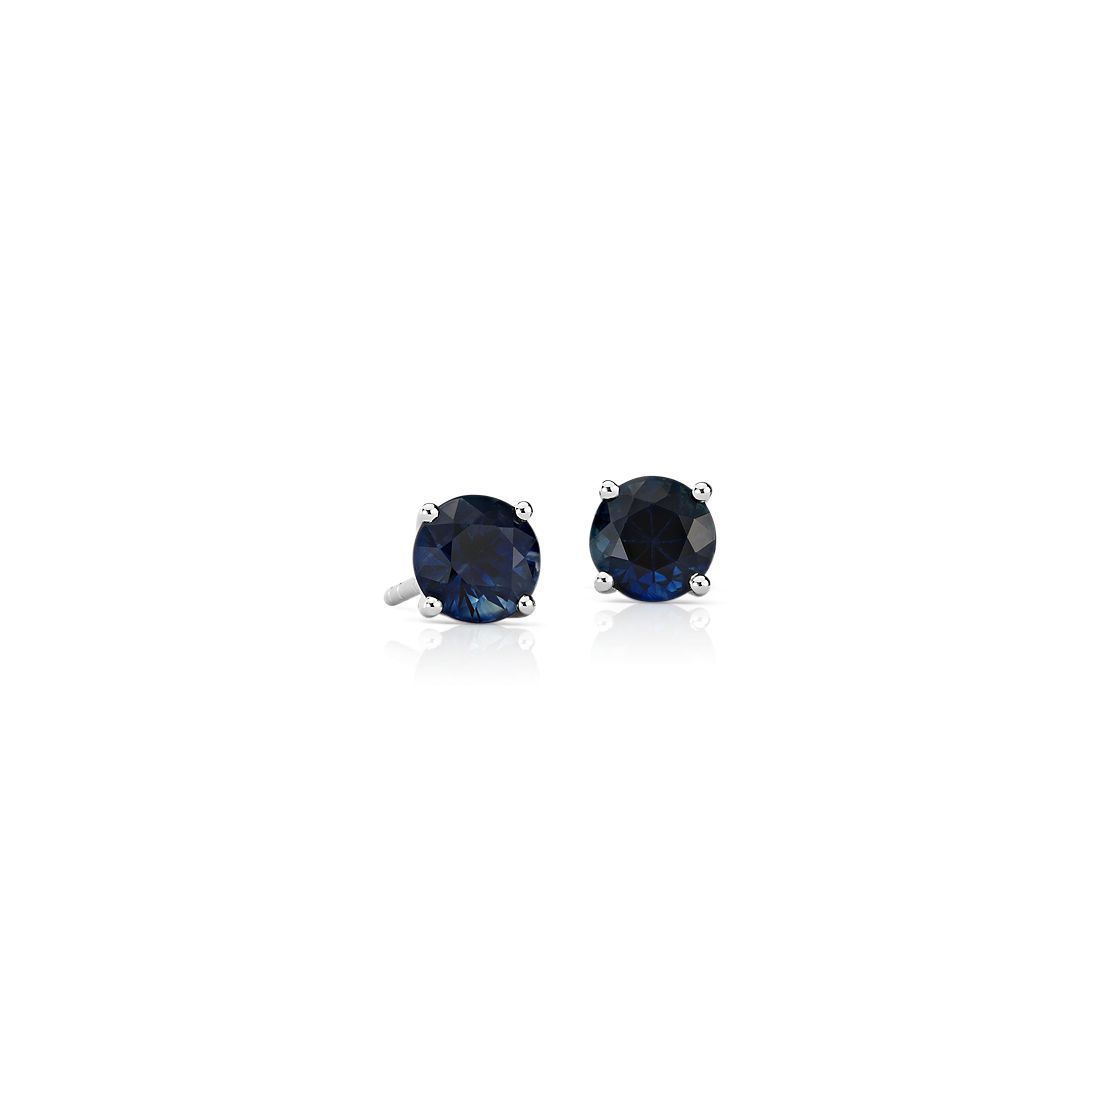 4.5 Ct Pear Cut Simulated Blue Sapphire Basket Stud Earrings In 14K Solid Gold 